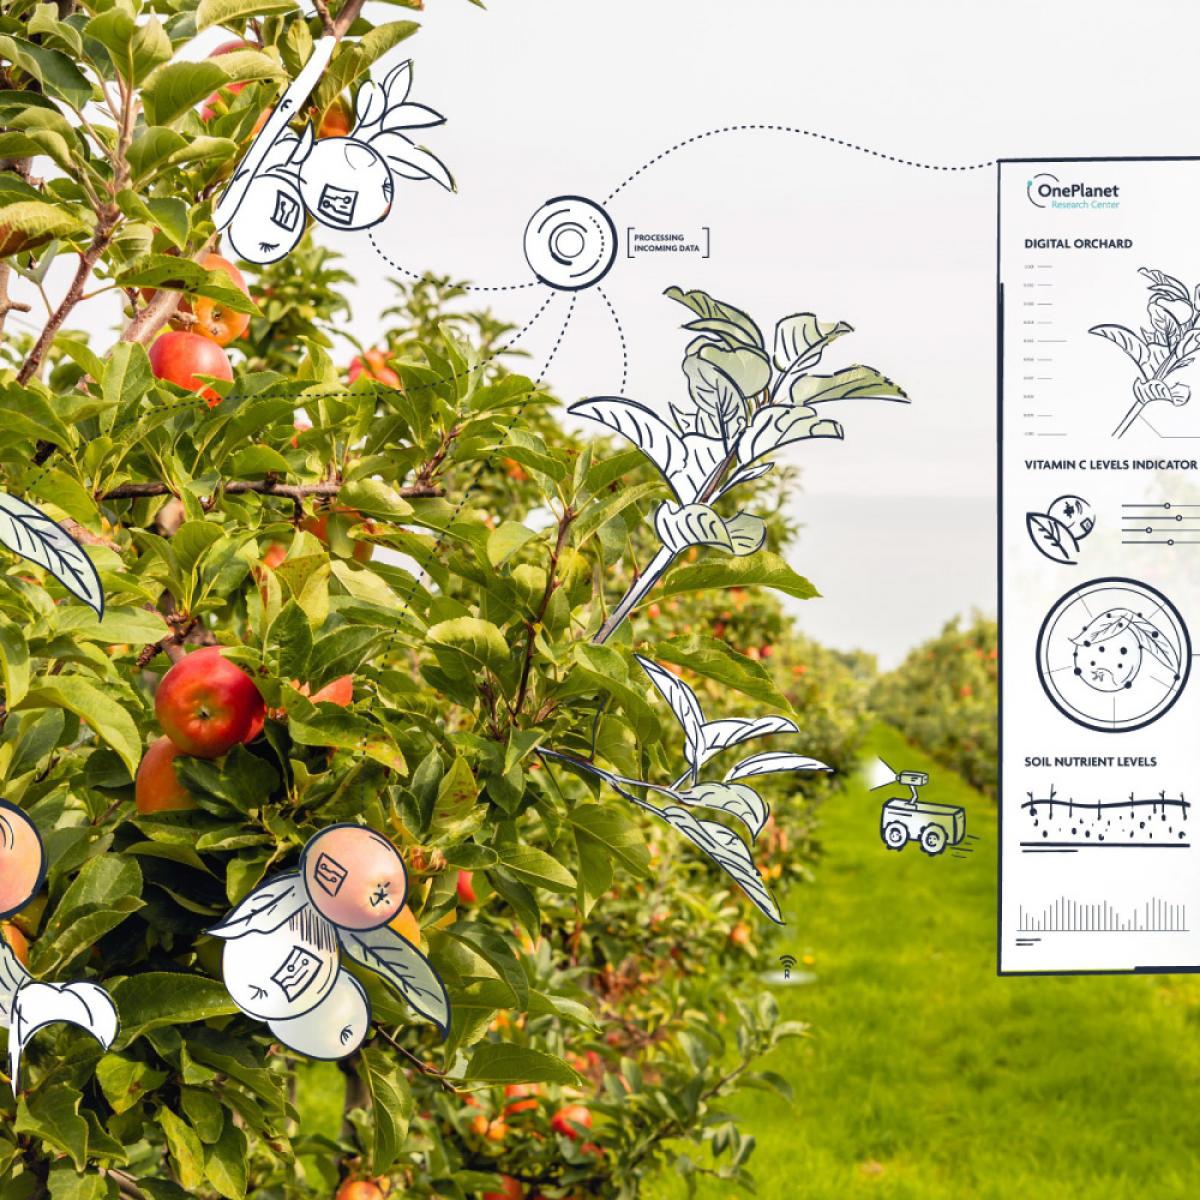 OnePlanet delivers innovative applications for sustainable farming and food supply